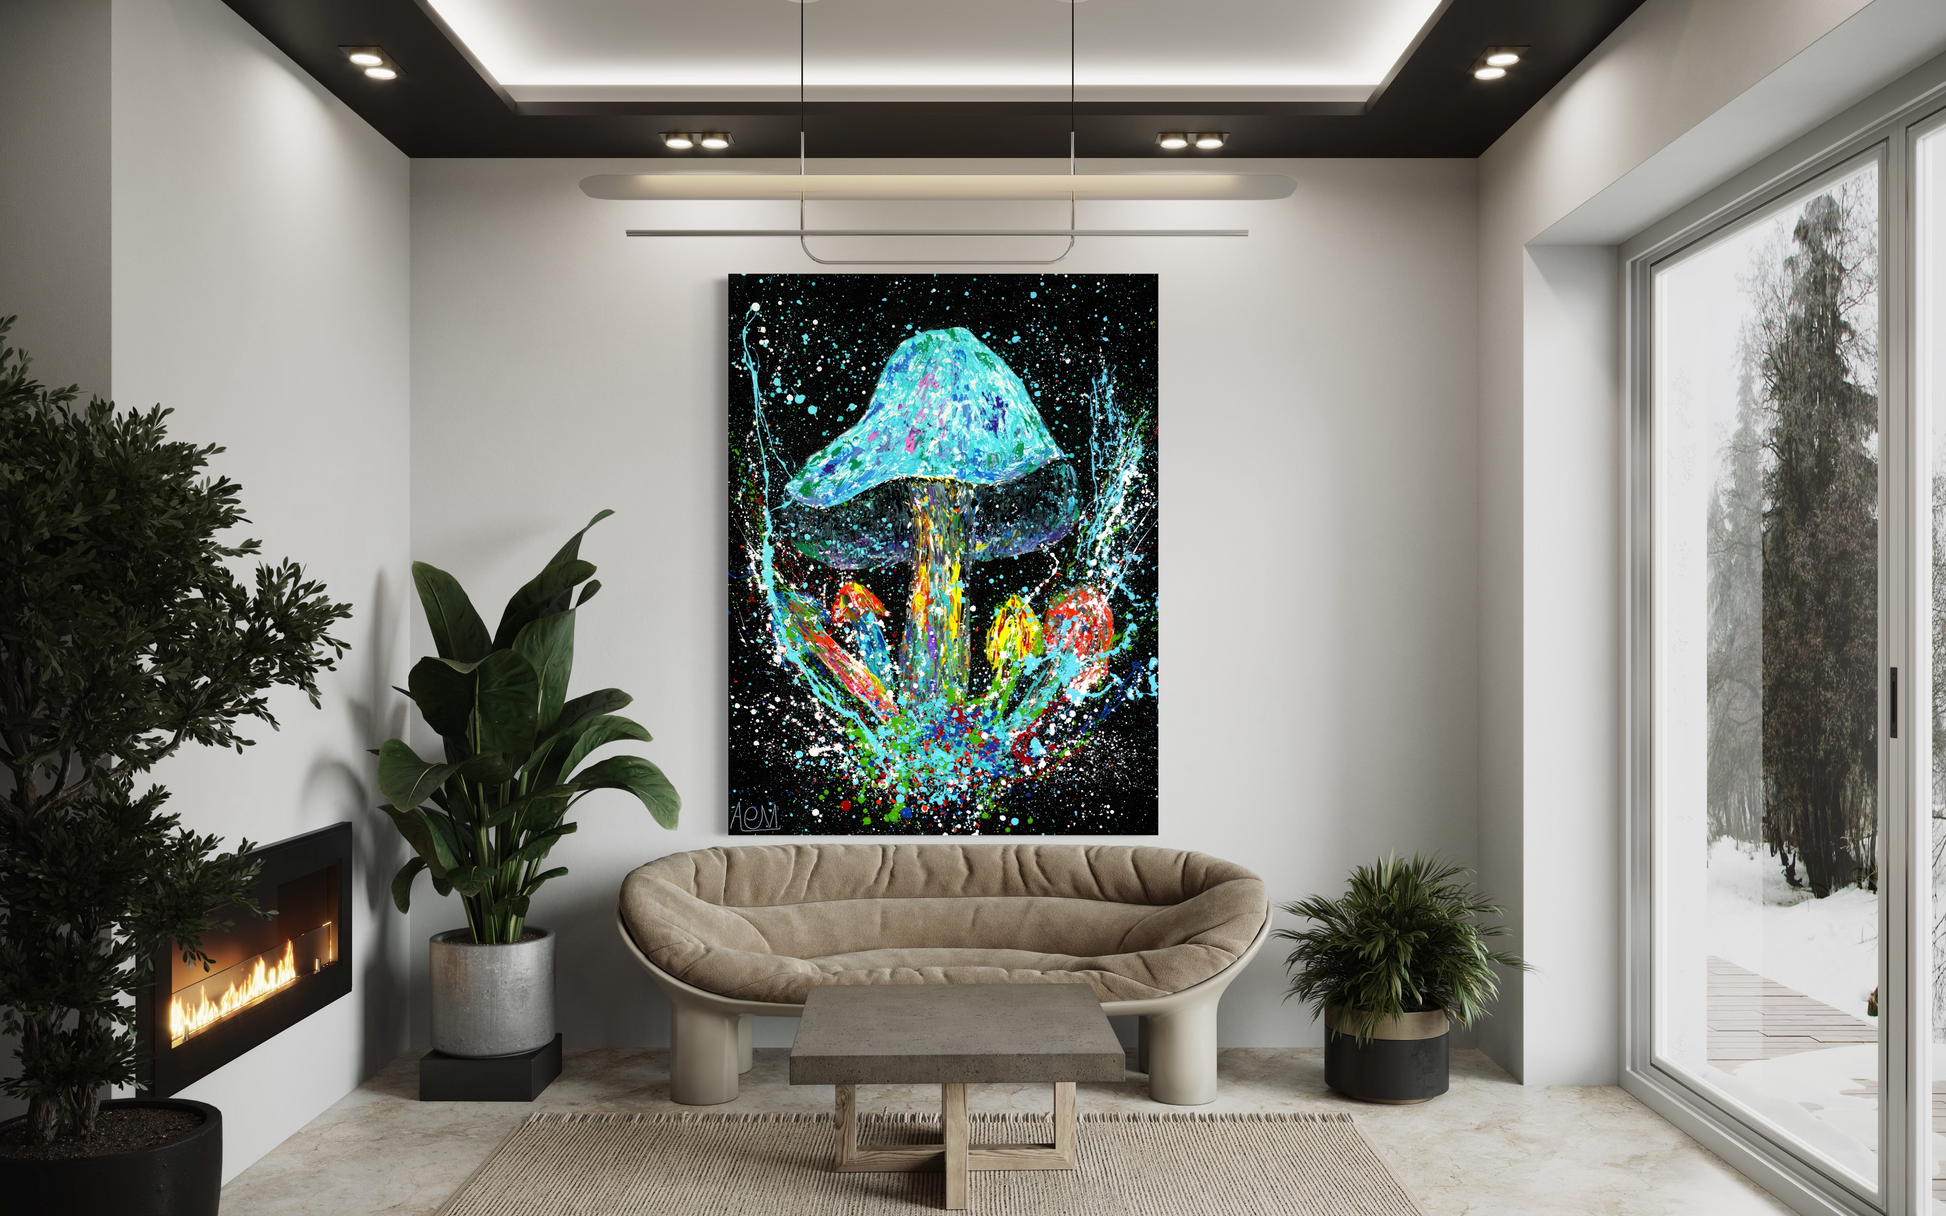 Modern living room featuring a mesmerizing large-scale abstract painting of a mushroom with a kaleidoscope of colors set against a black space-like background, positioned above a plush curved sofa, complemented by indoor plants and a sleek fireplace